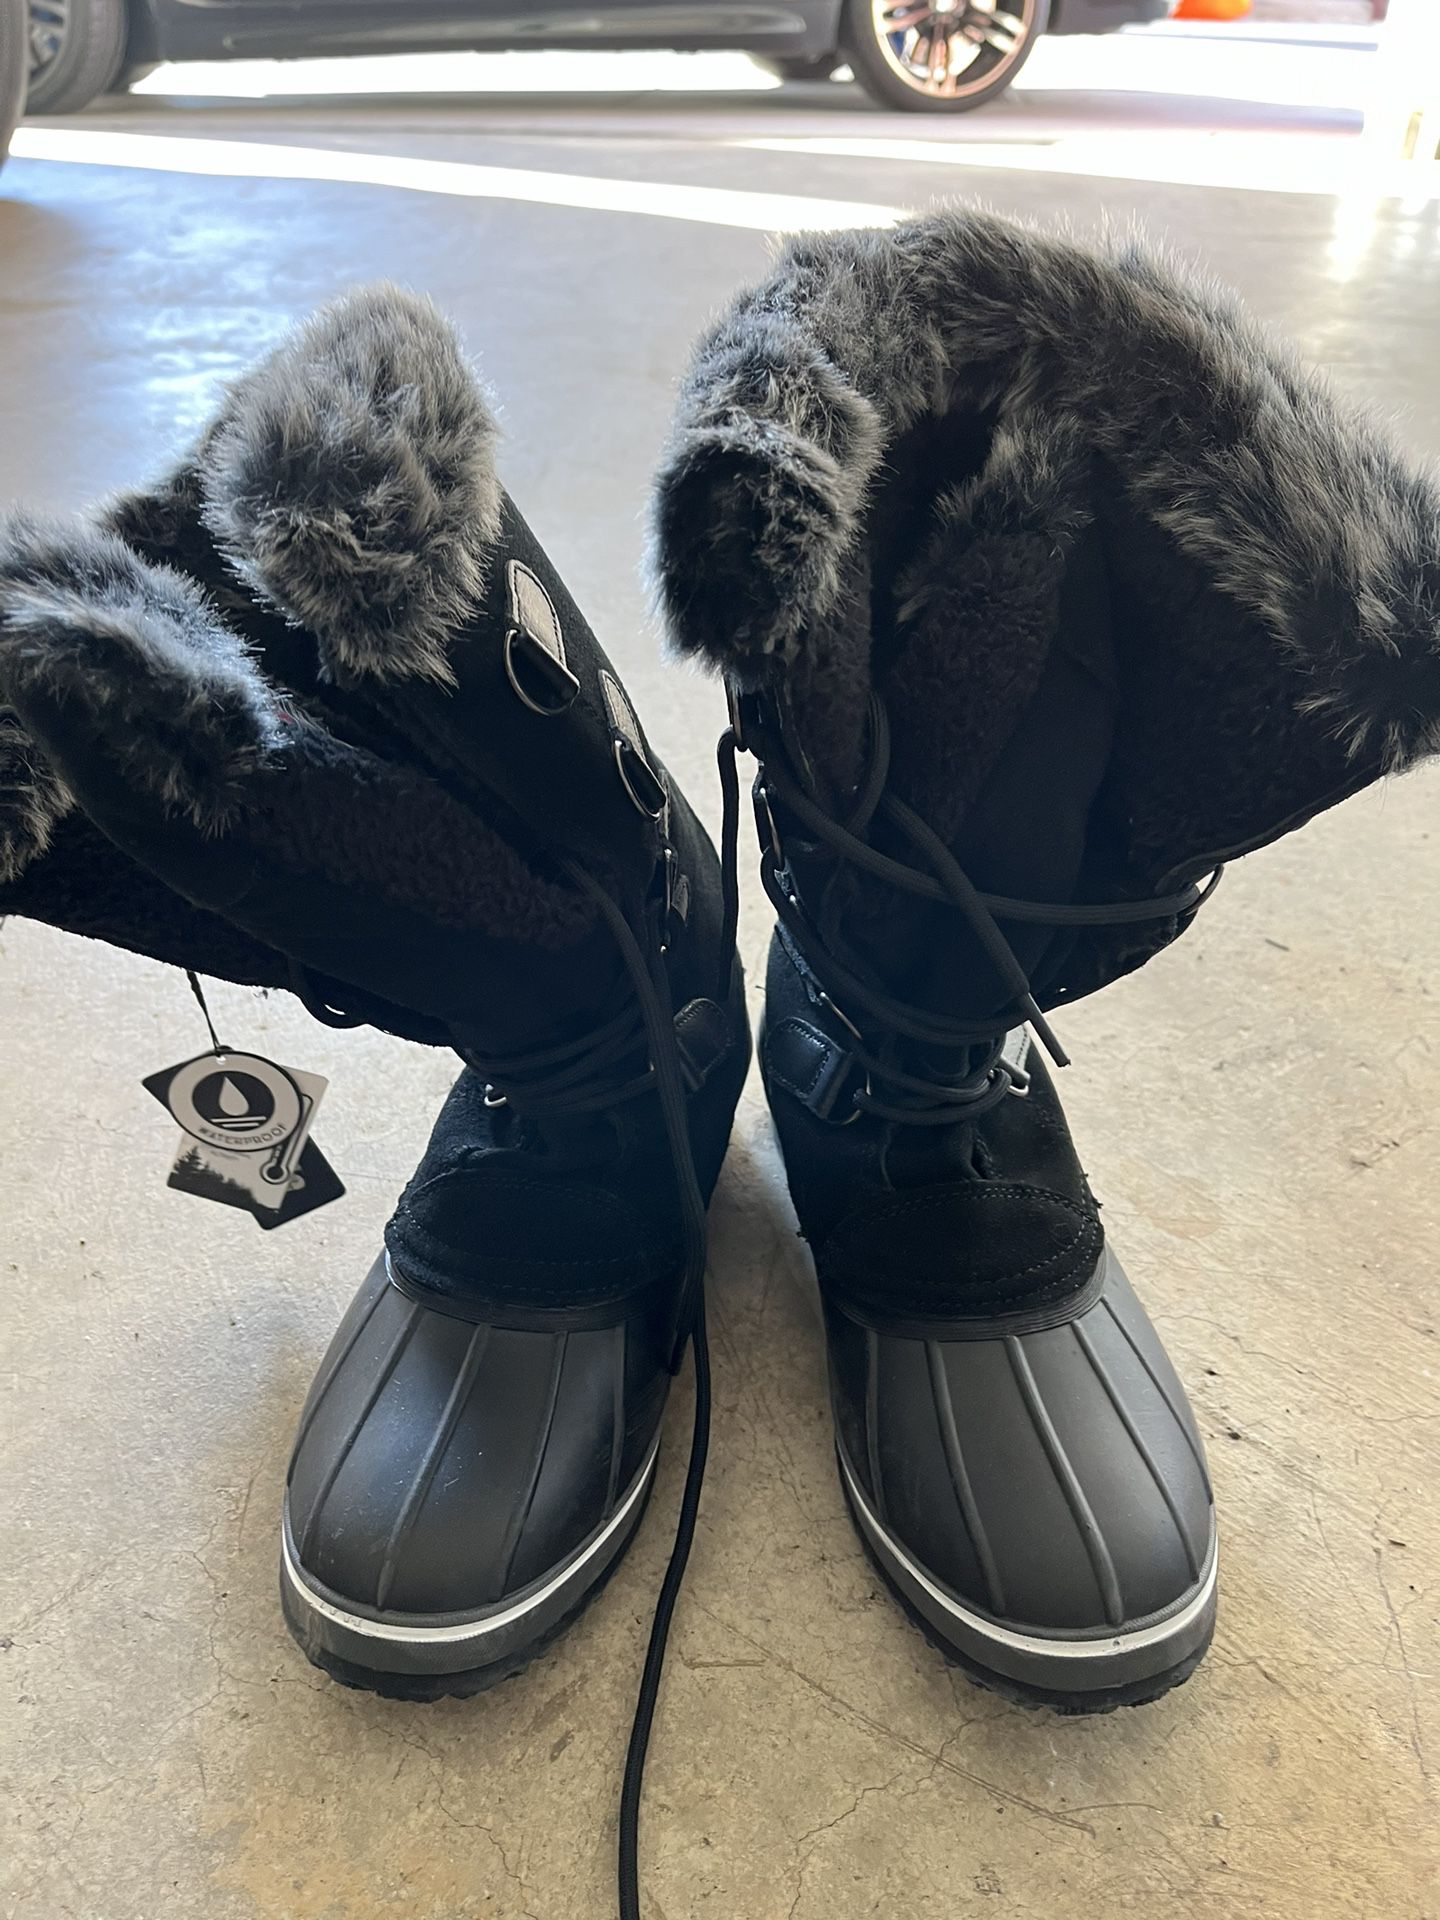 NEW—Snow Boots 9.5 Size (Northside Elements brand) 